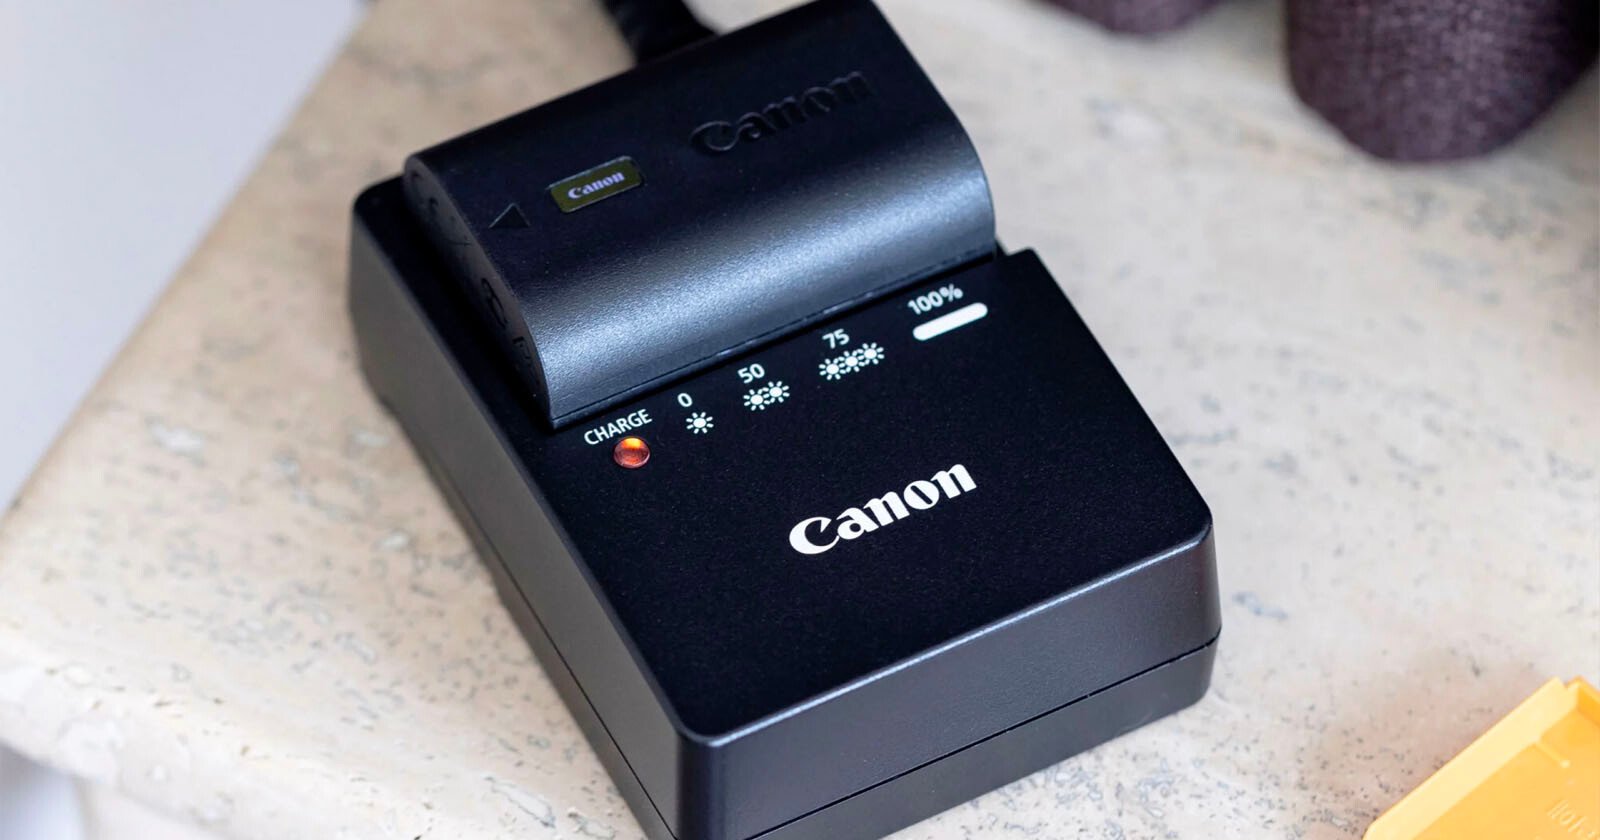  amazon canon joint lawsuit against camera battery 